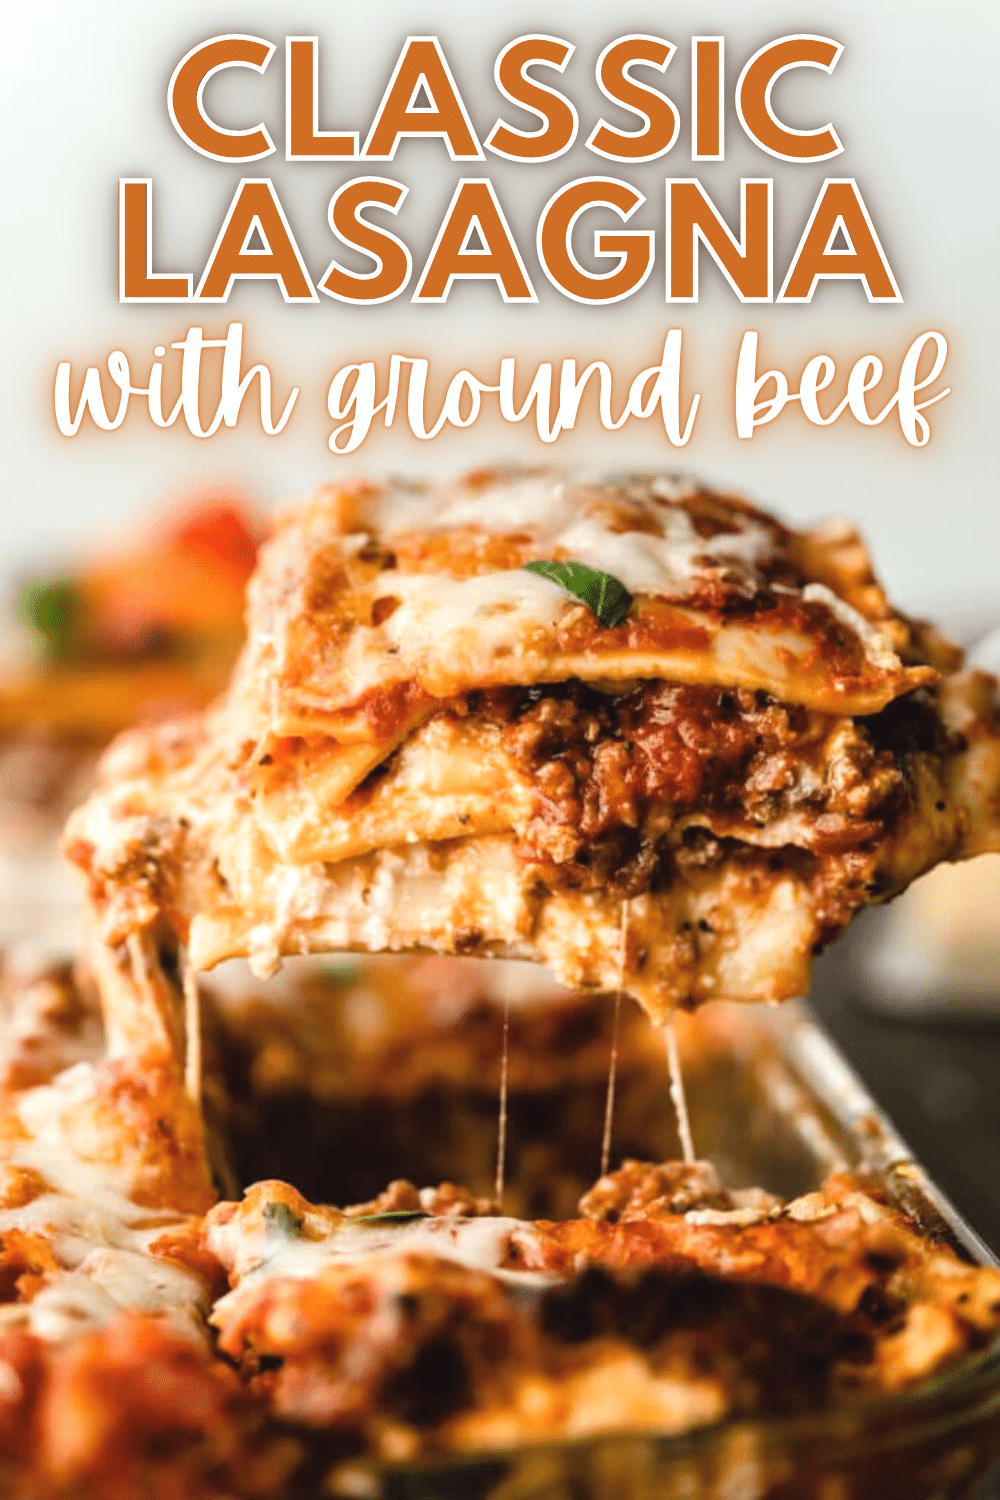 This Classic Lasagna Recipe with Ground Beef is an easy way to make homemade lasagna. Just 30 minutes of baking & your family will love it! #lasagna #groundbeef #recipe #homemade via @wondermomwannab